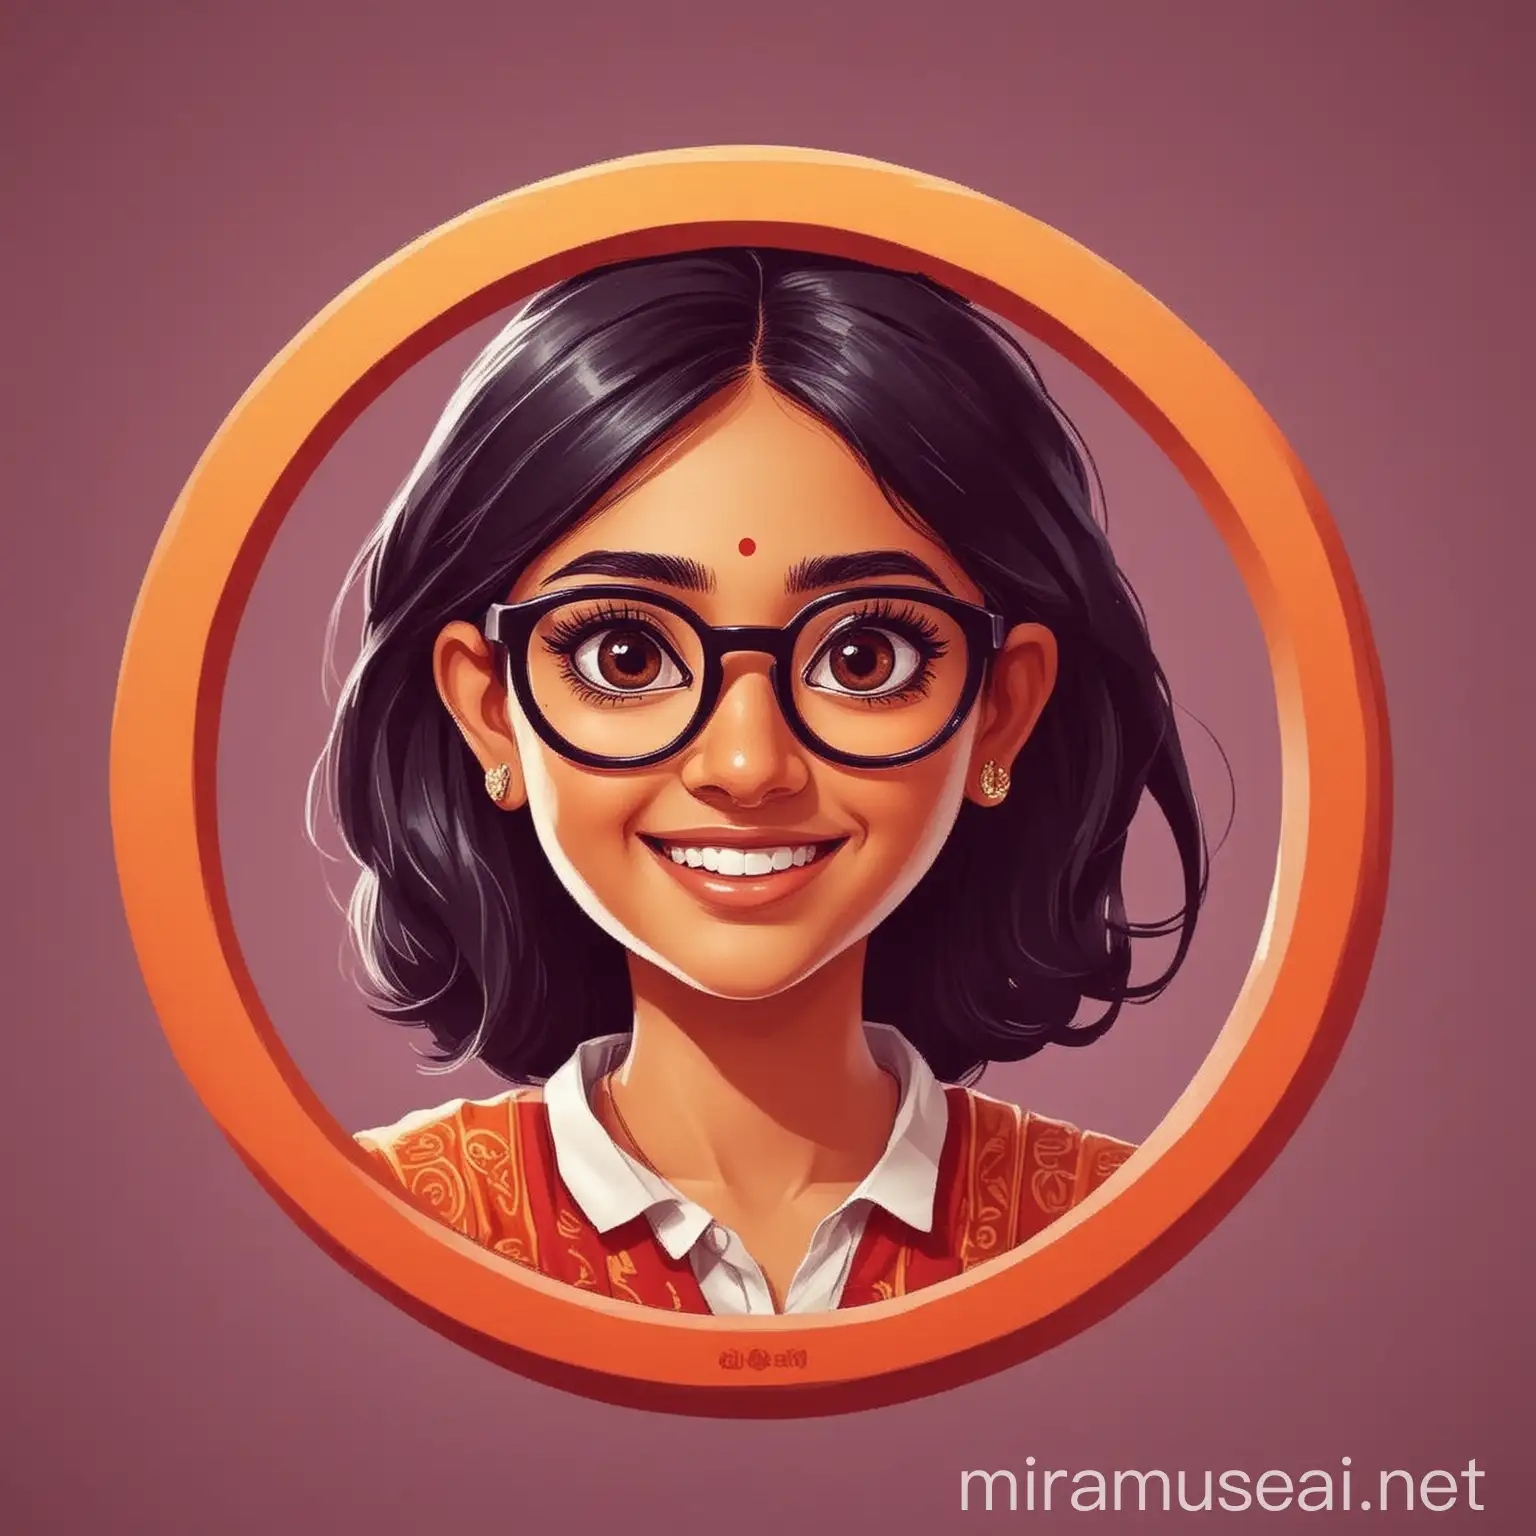 generate an animated logo for a business named AKIA, in the logo there must be an Indian girl fair in colour of around 23 years wearing spectacles and smiling a bit in the centre preferably in a circle or an ellipse. the image should be like vector art